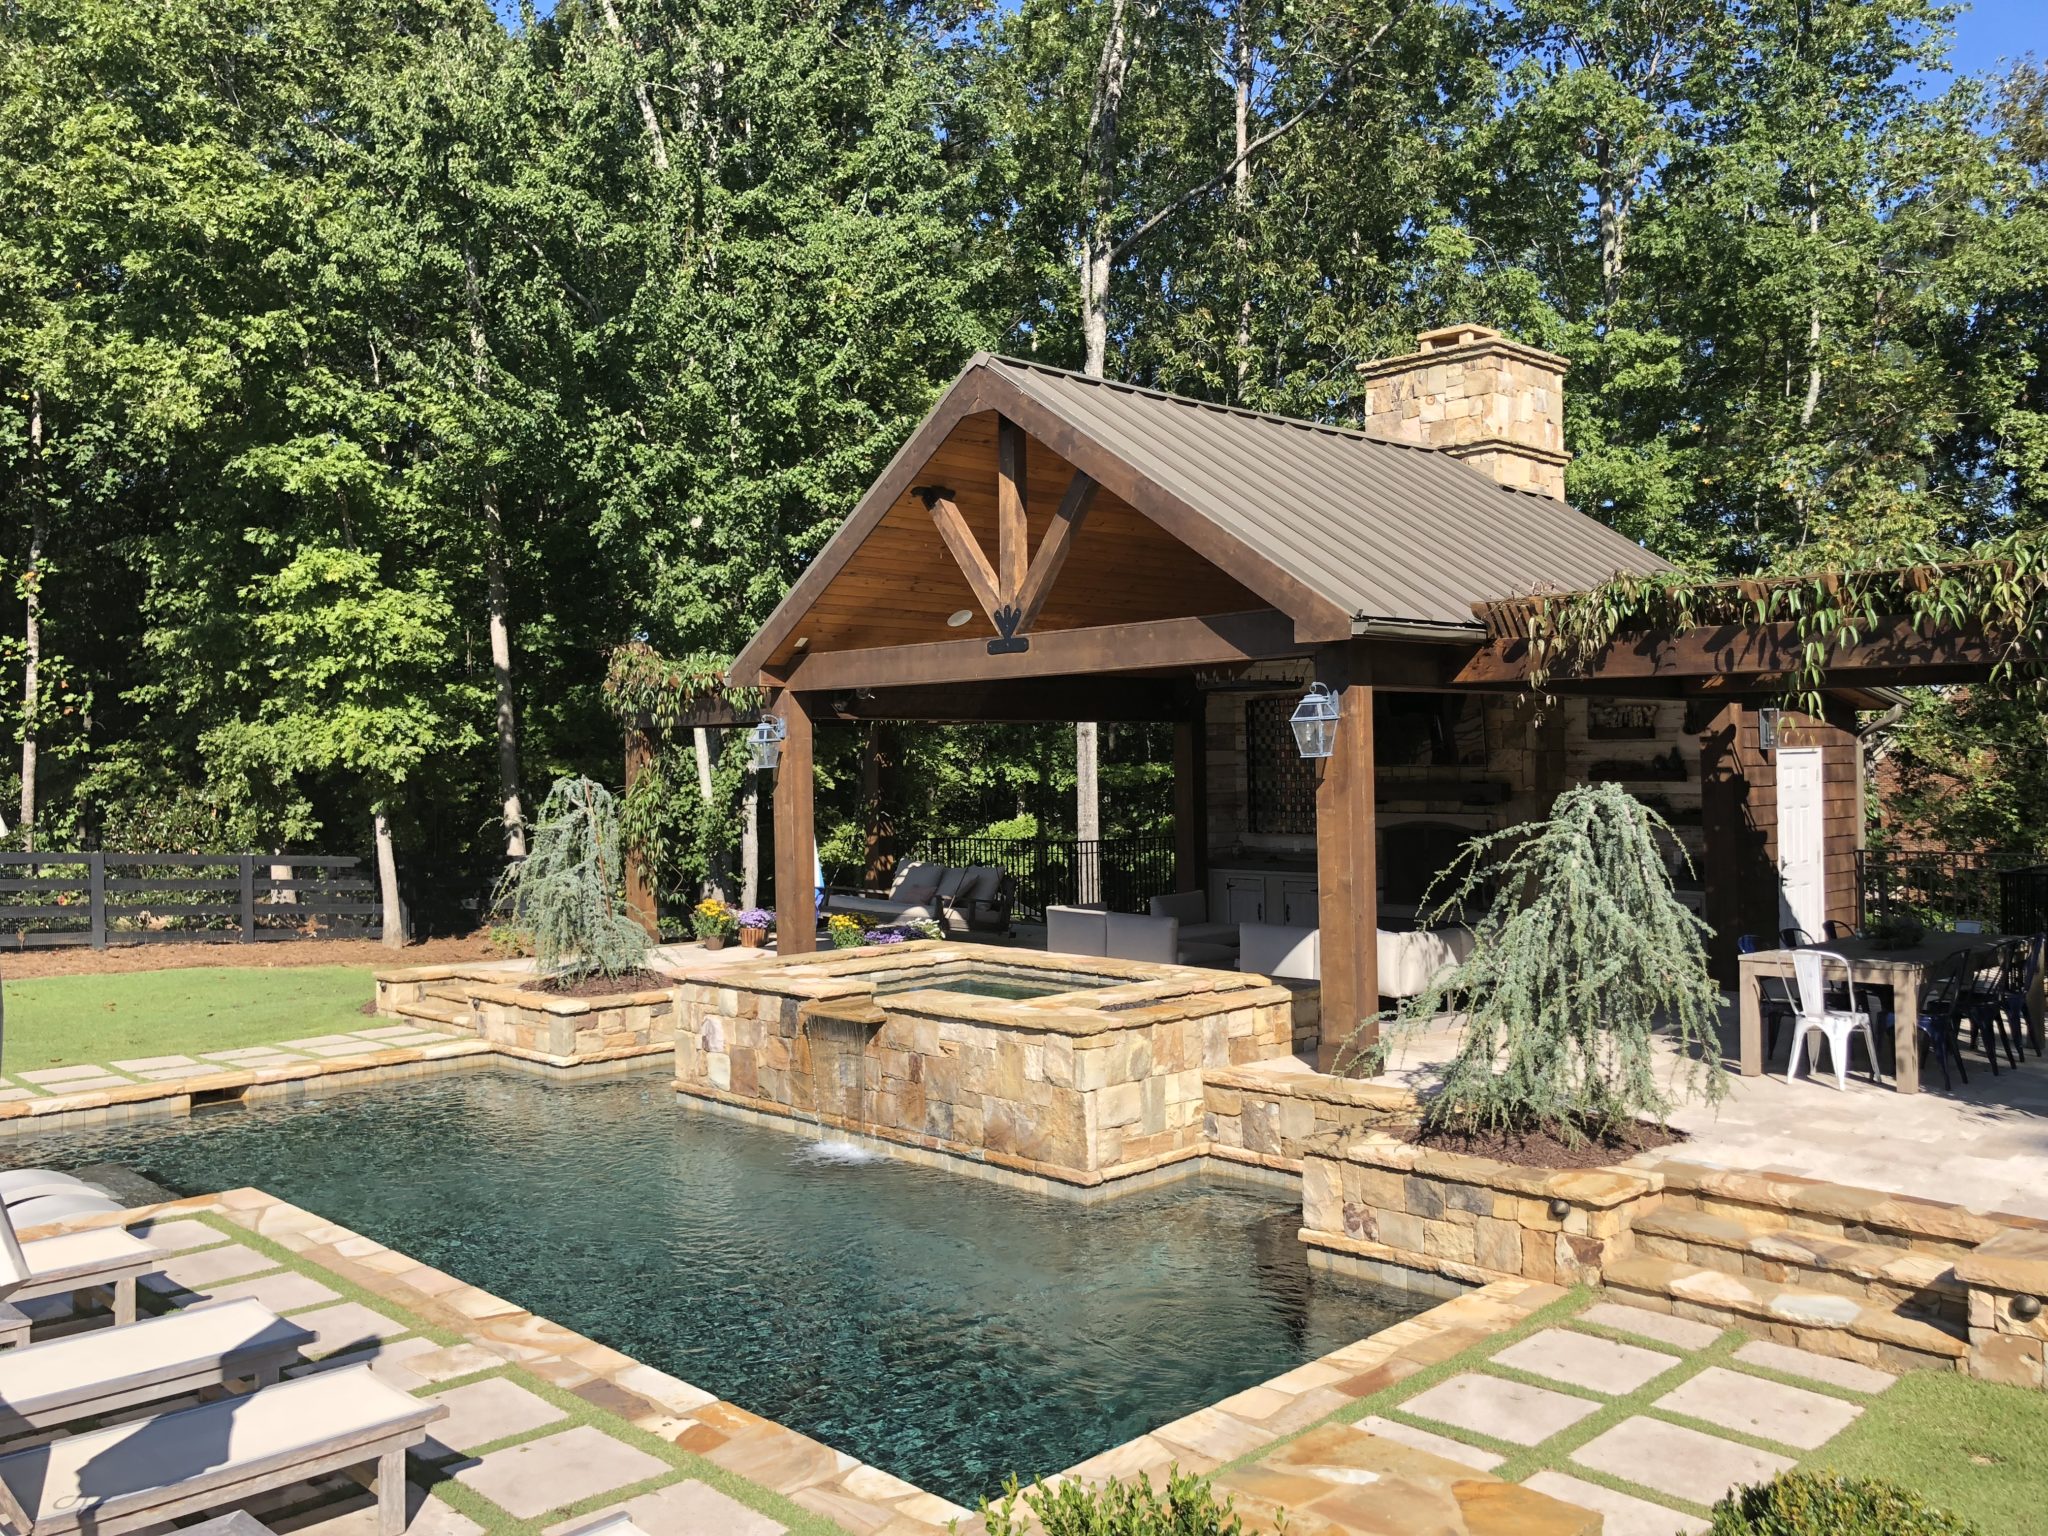 A serene vaulted cabana featuring a rustic stone fireplace and picturesque arbor, nestled by a sparkling swimming pool.